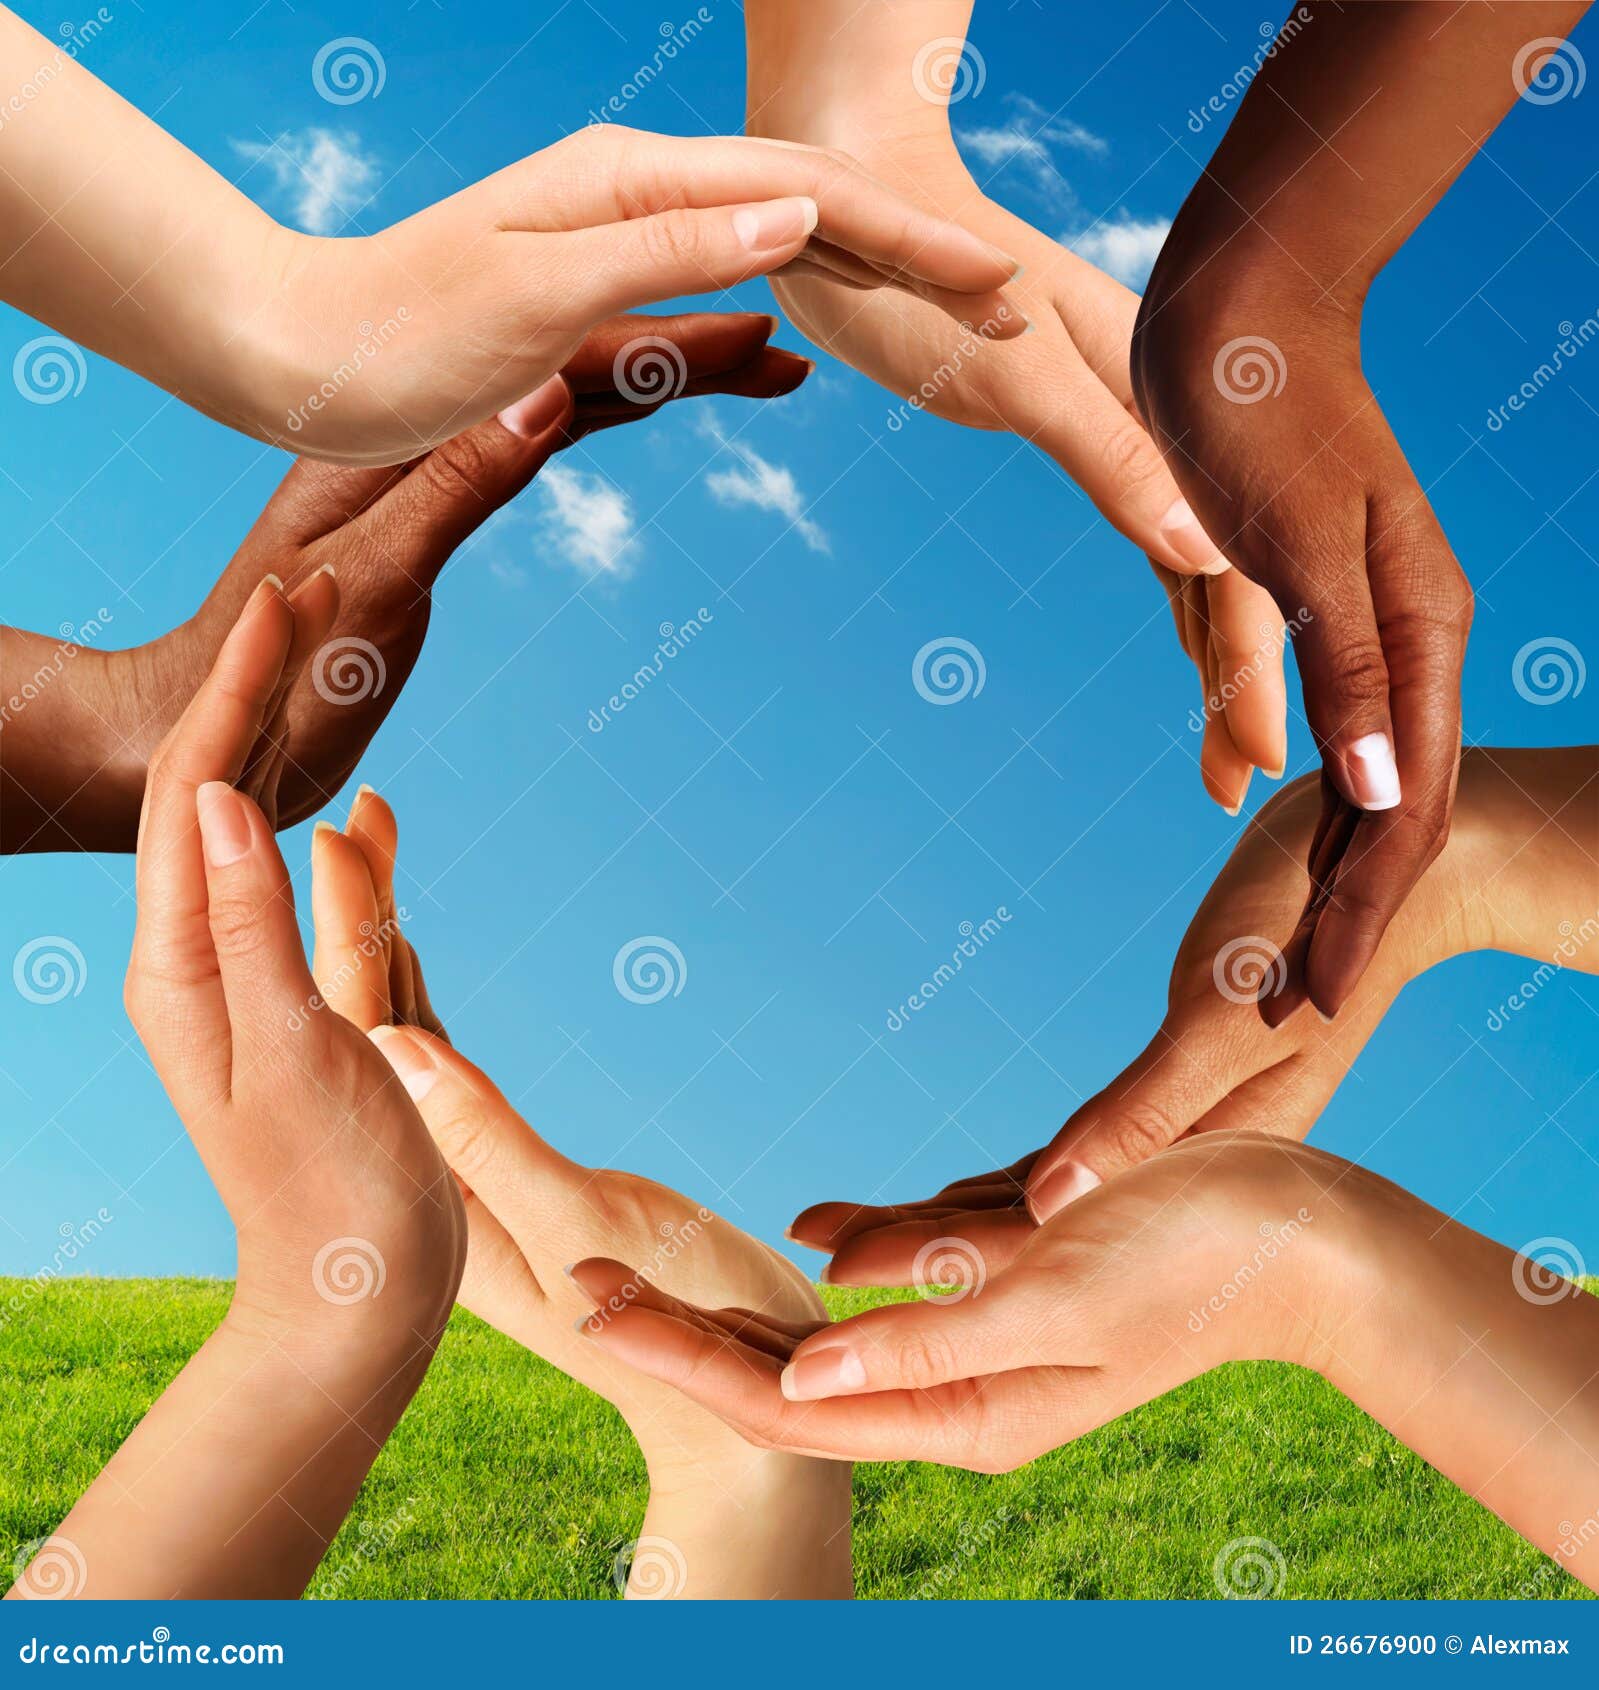 multiracial hands making a circle together